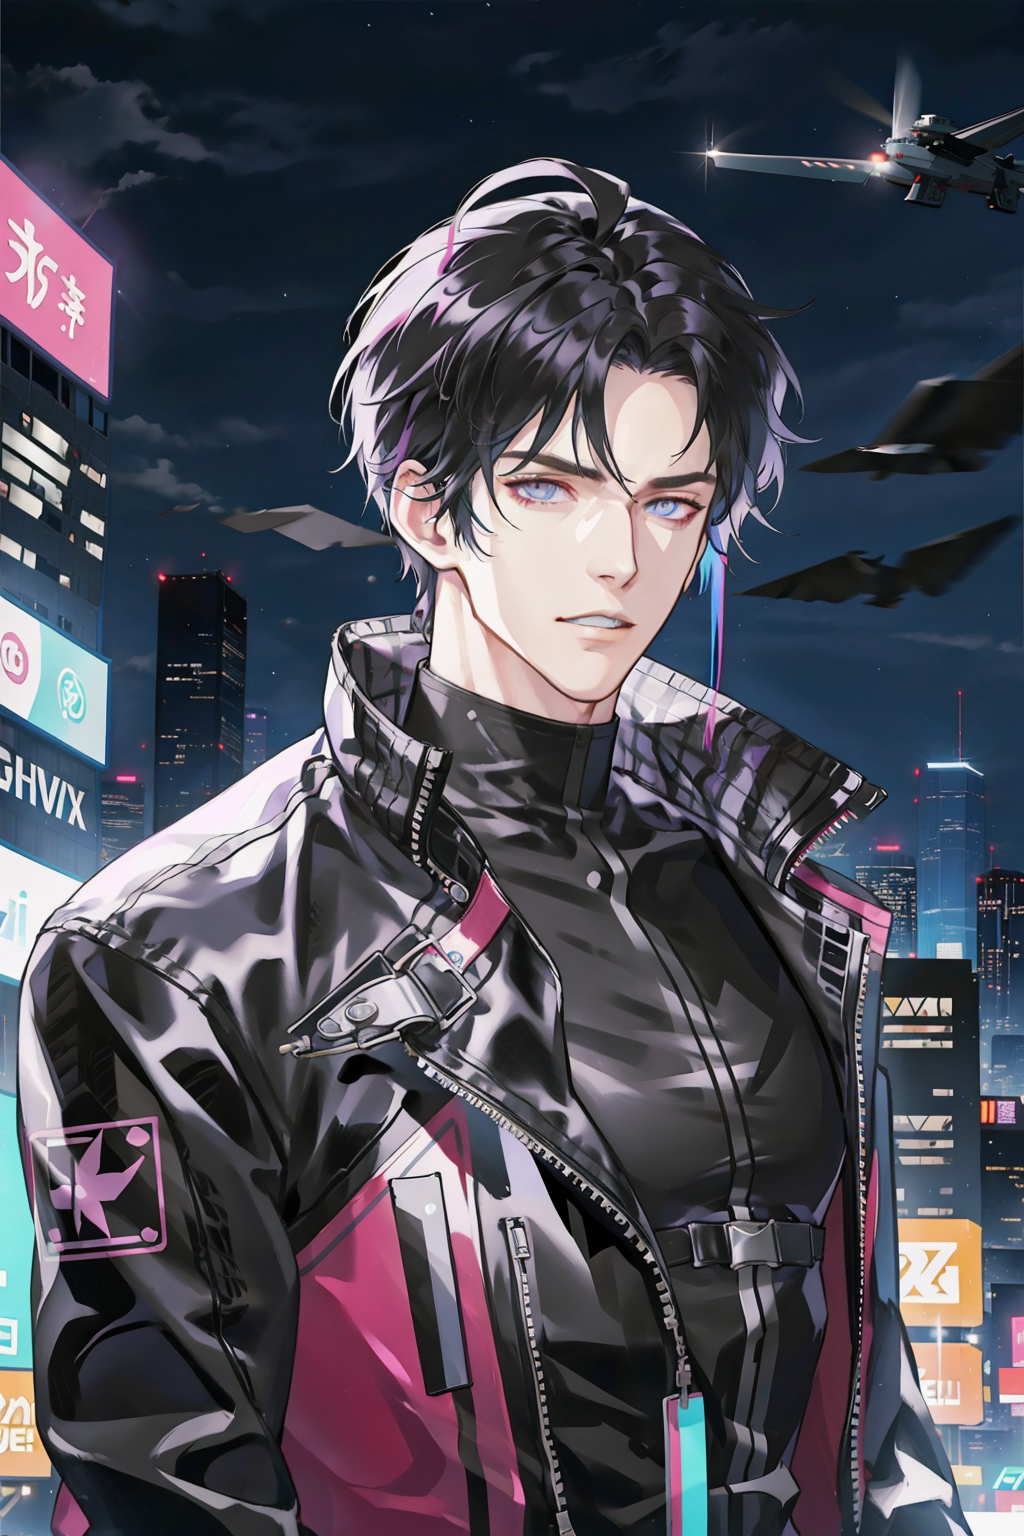 masterpiece, best quality, 1 male, handsome, tall muscular guy, Cyberpunk, motorcycle, neon hair, holographic, black jacke...